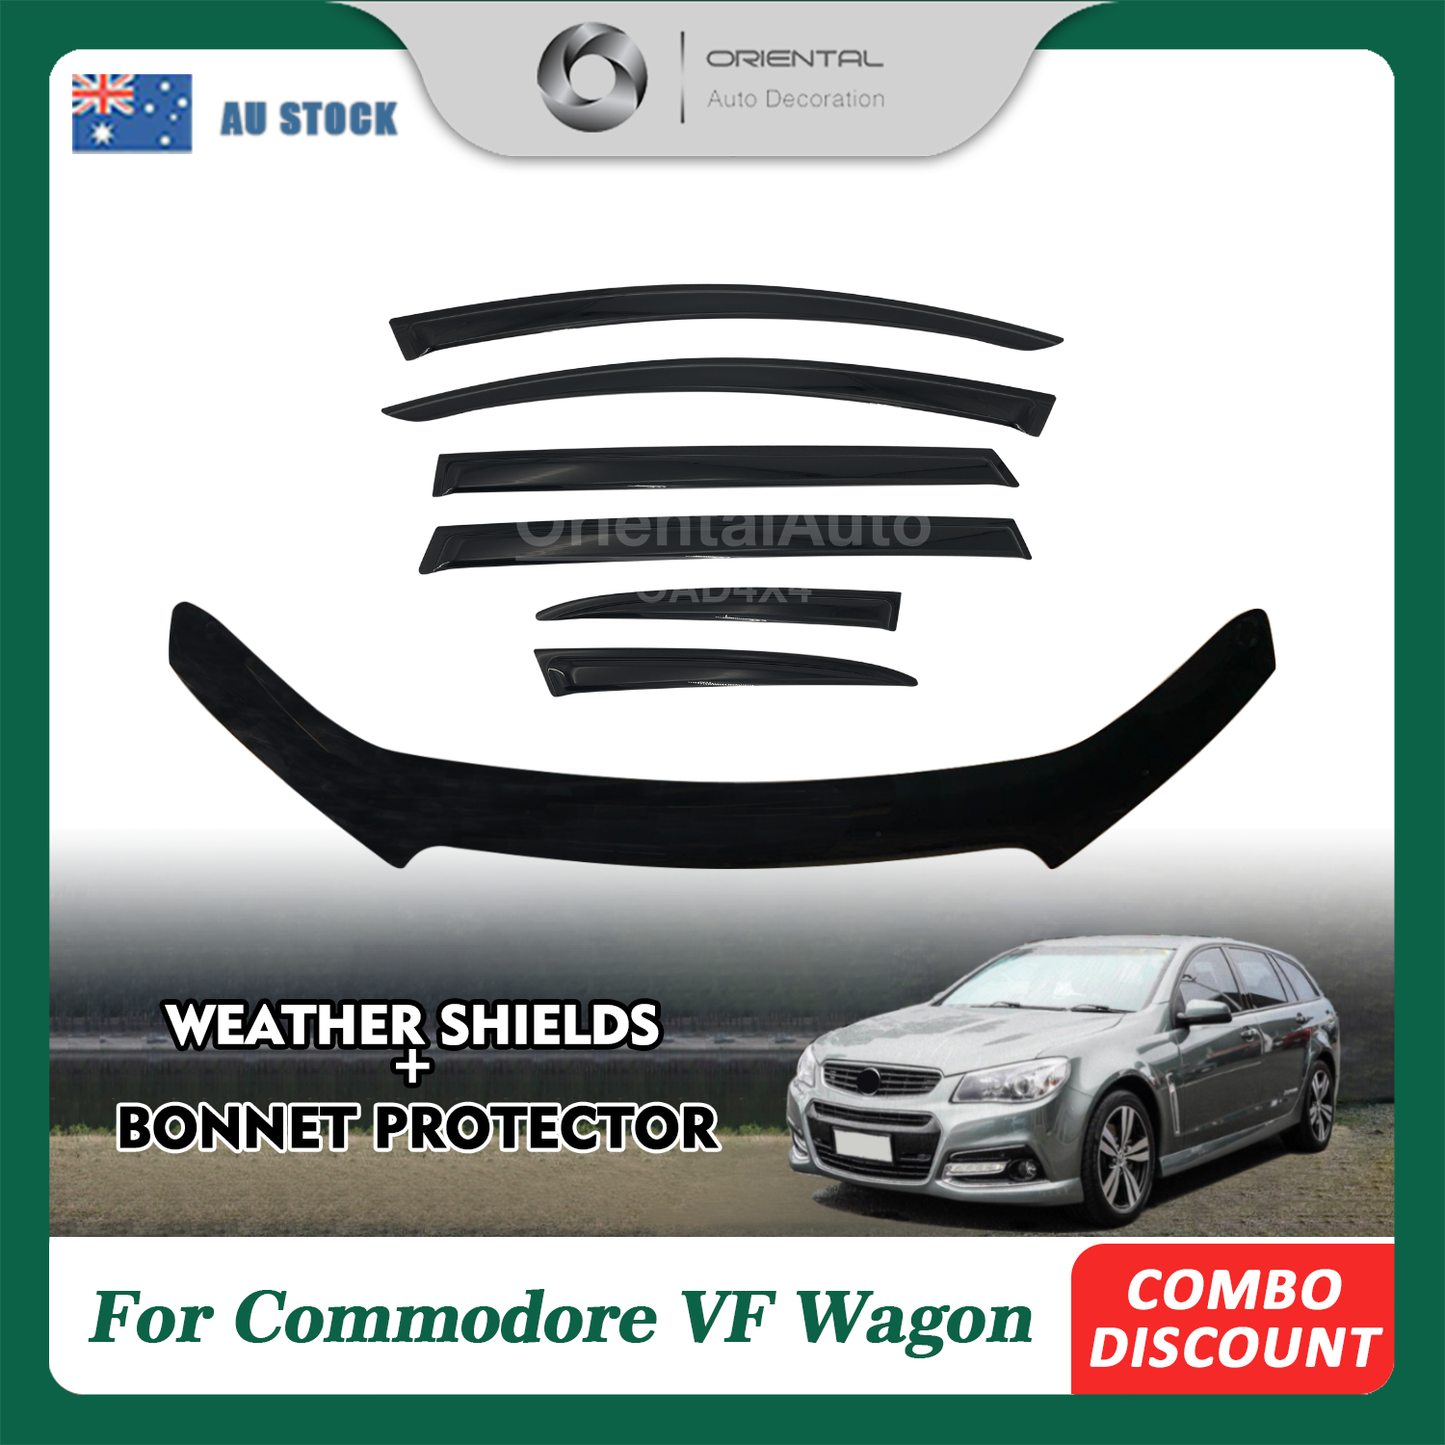 Bonnet Protector & Luxury 6pcs Weathershields Weather Shields Window Visor for Holden Commodore VF Wagon 2013-2016